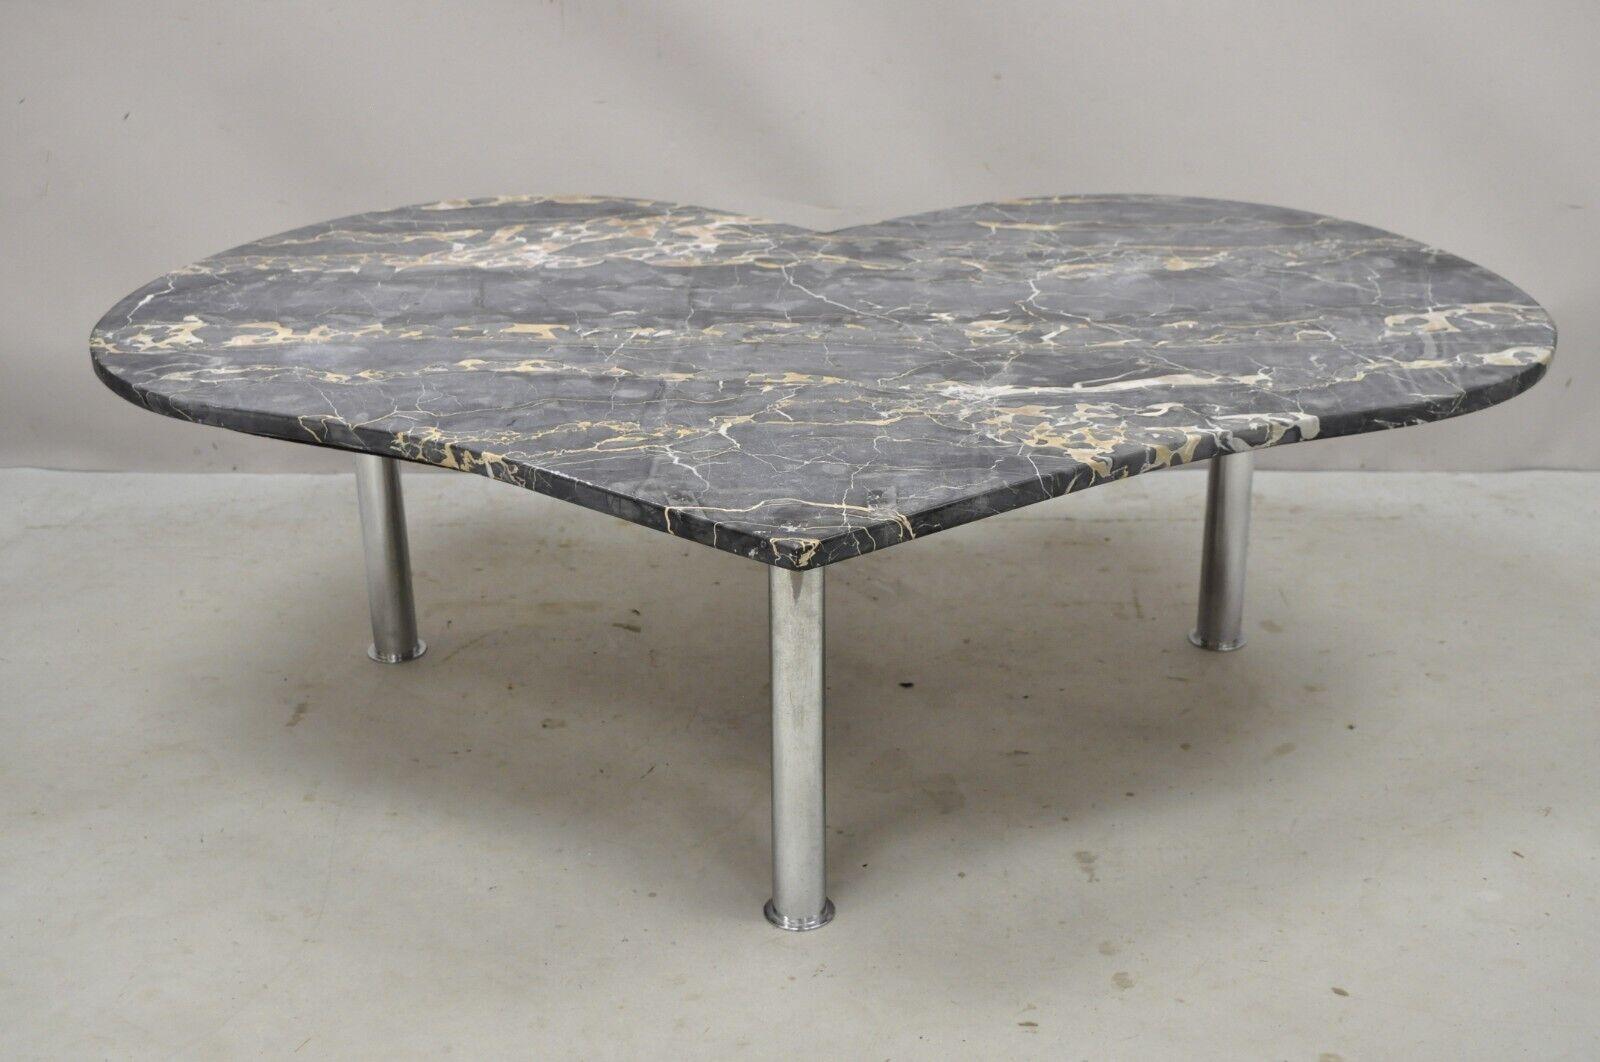 Vintage custom made Italian marble top heart shaped coffee table. Item features a vintage custom made heart shaped Italian marble table top, chrome metal cylindrical legs, very nice vintage item, clean modernist lines, great style and form. Circa